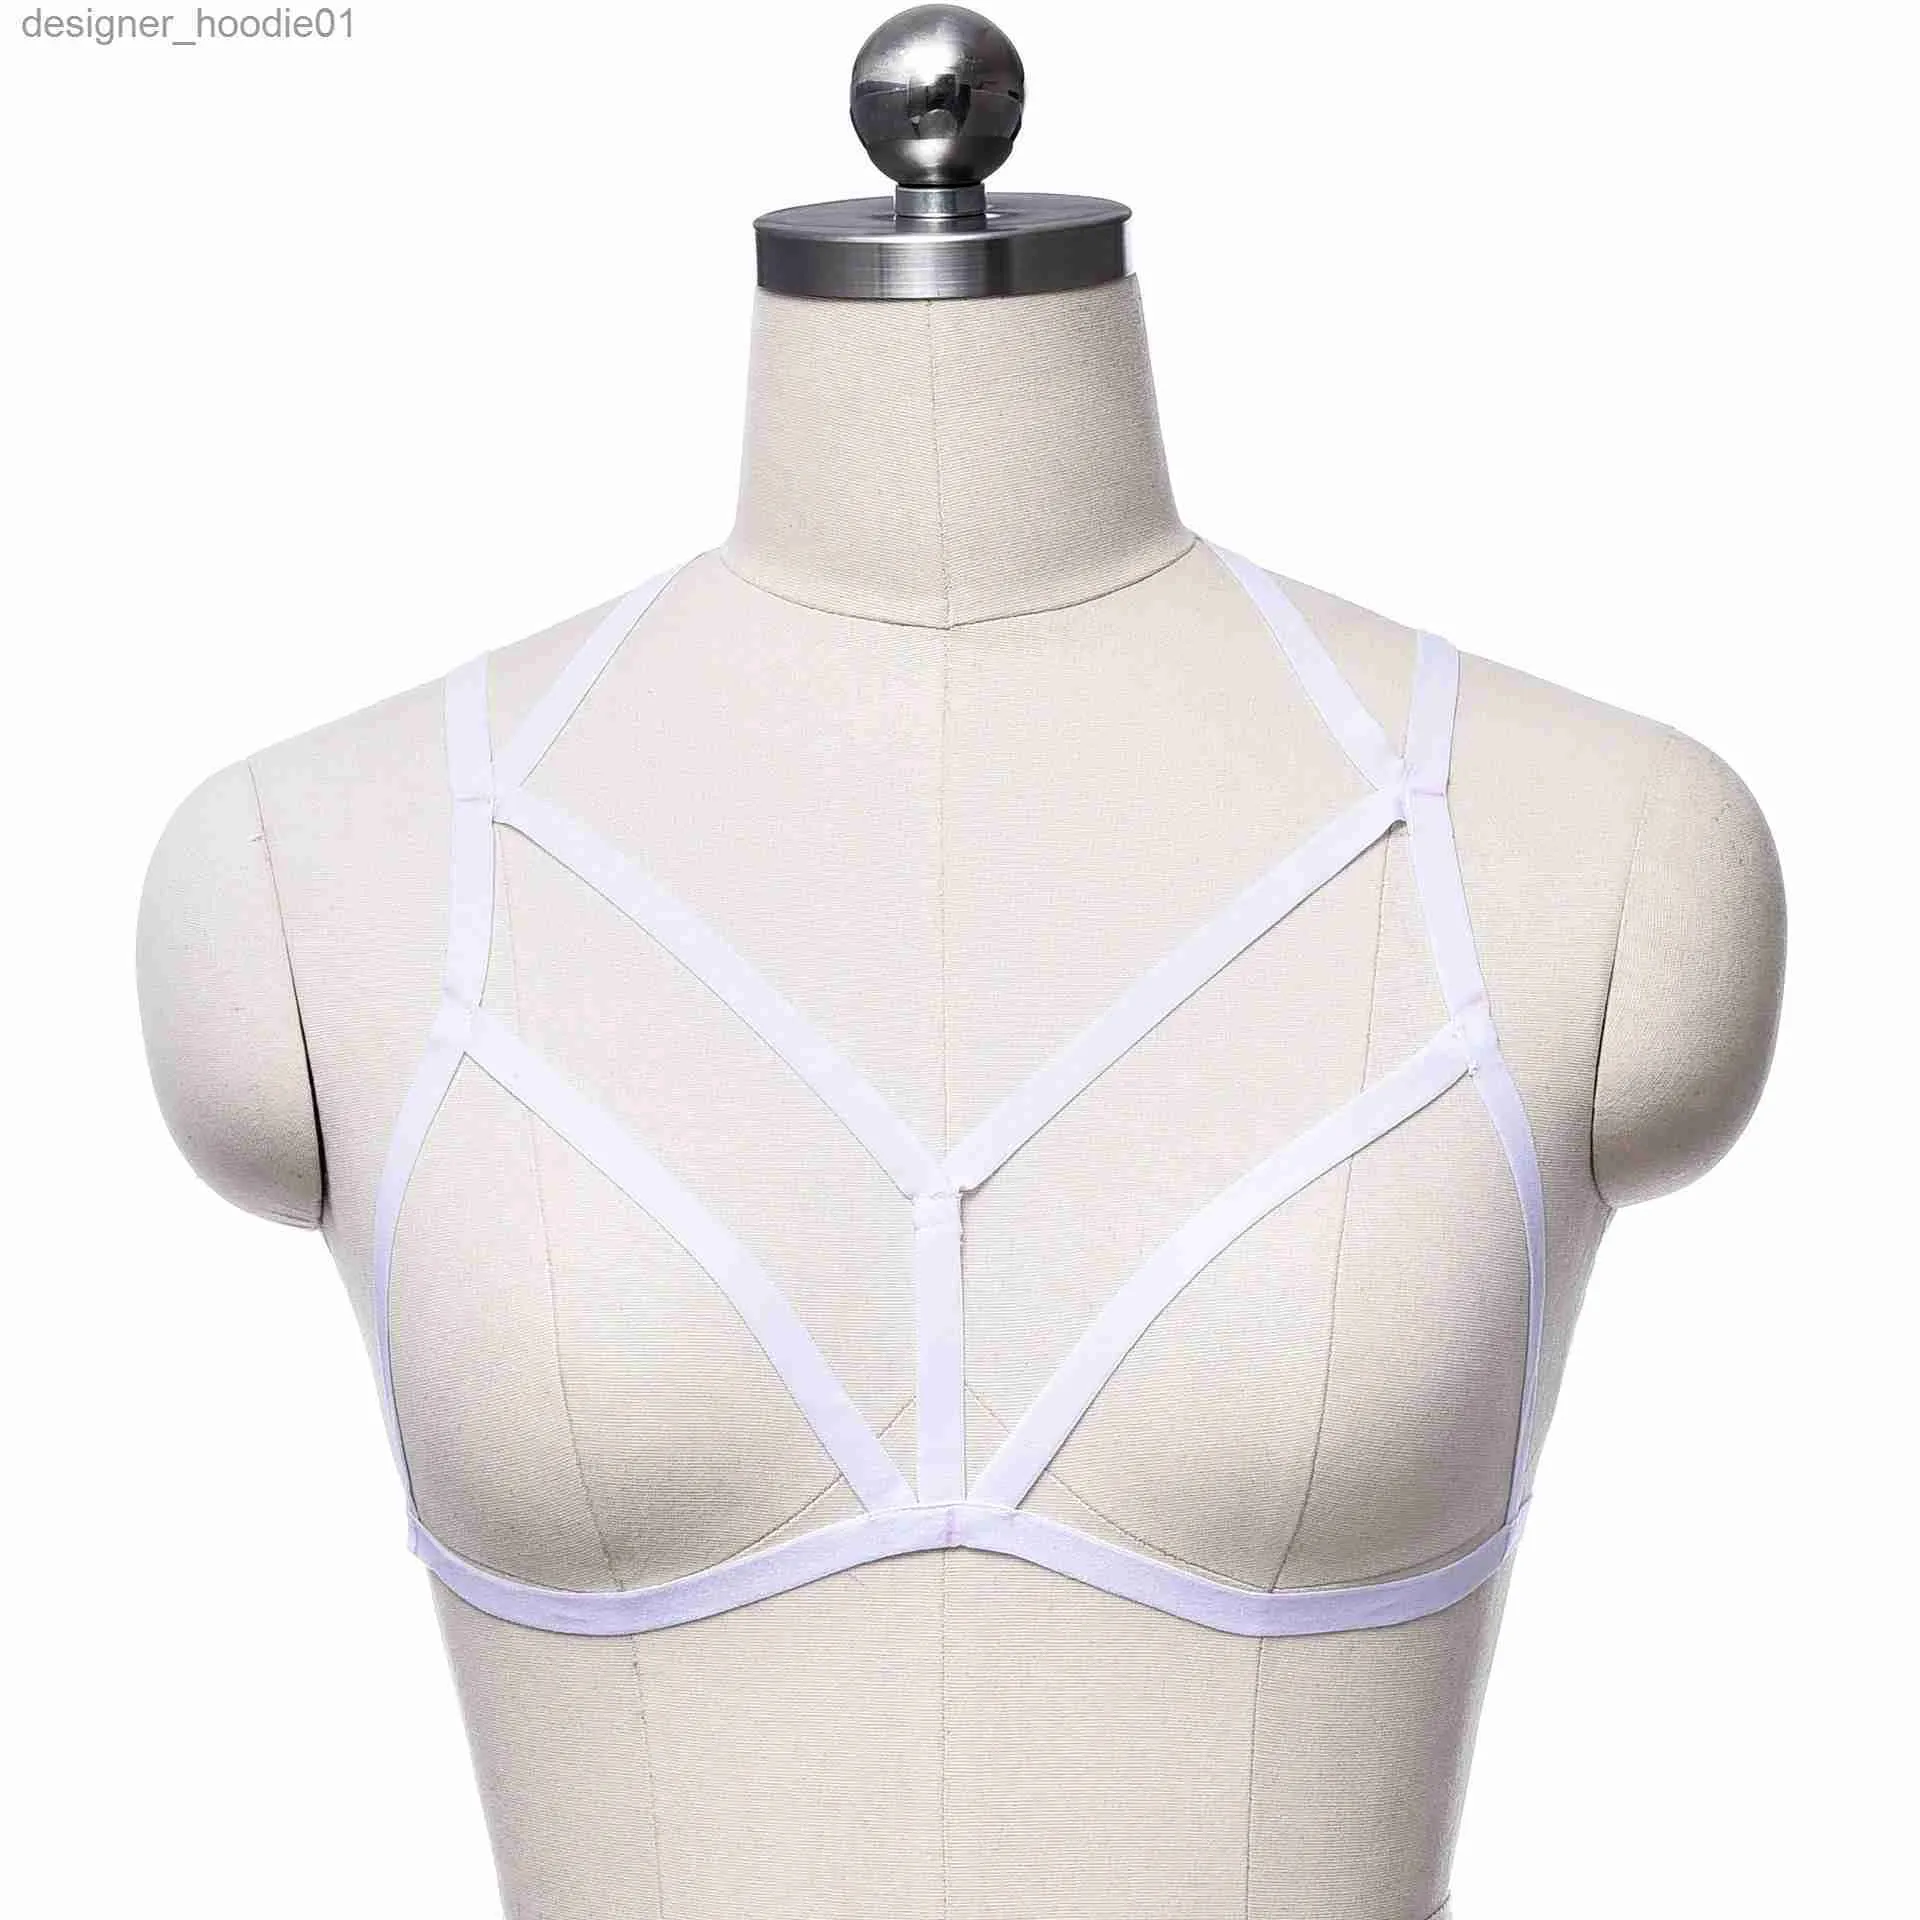 Sexy Set Bras Sets Women Open Cup Bra Bondage Lingerie Sexy Sling Slave  Cosplay Costumes Erotic Underwear Porn Breast Bandage Bdsm Toys For Sex  L230918 From Spider_hoodie, $3.55